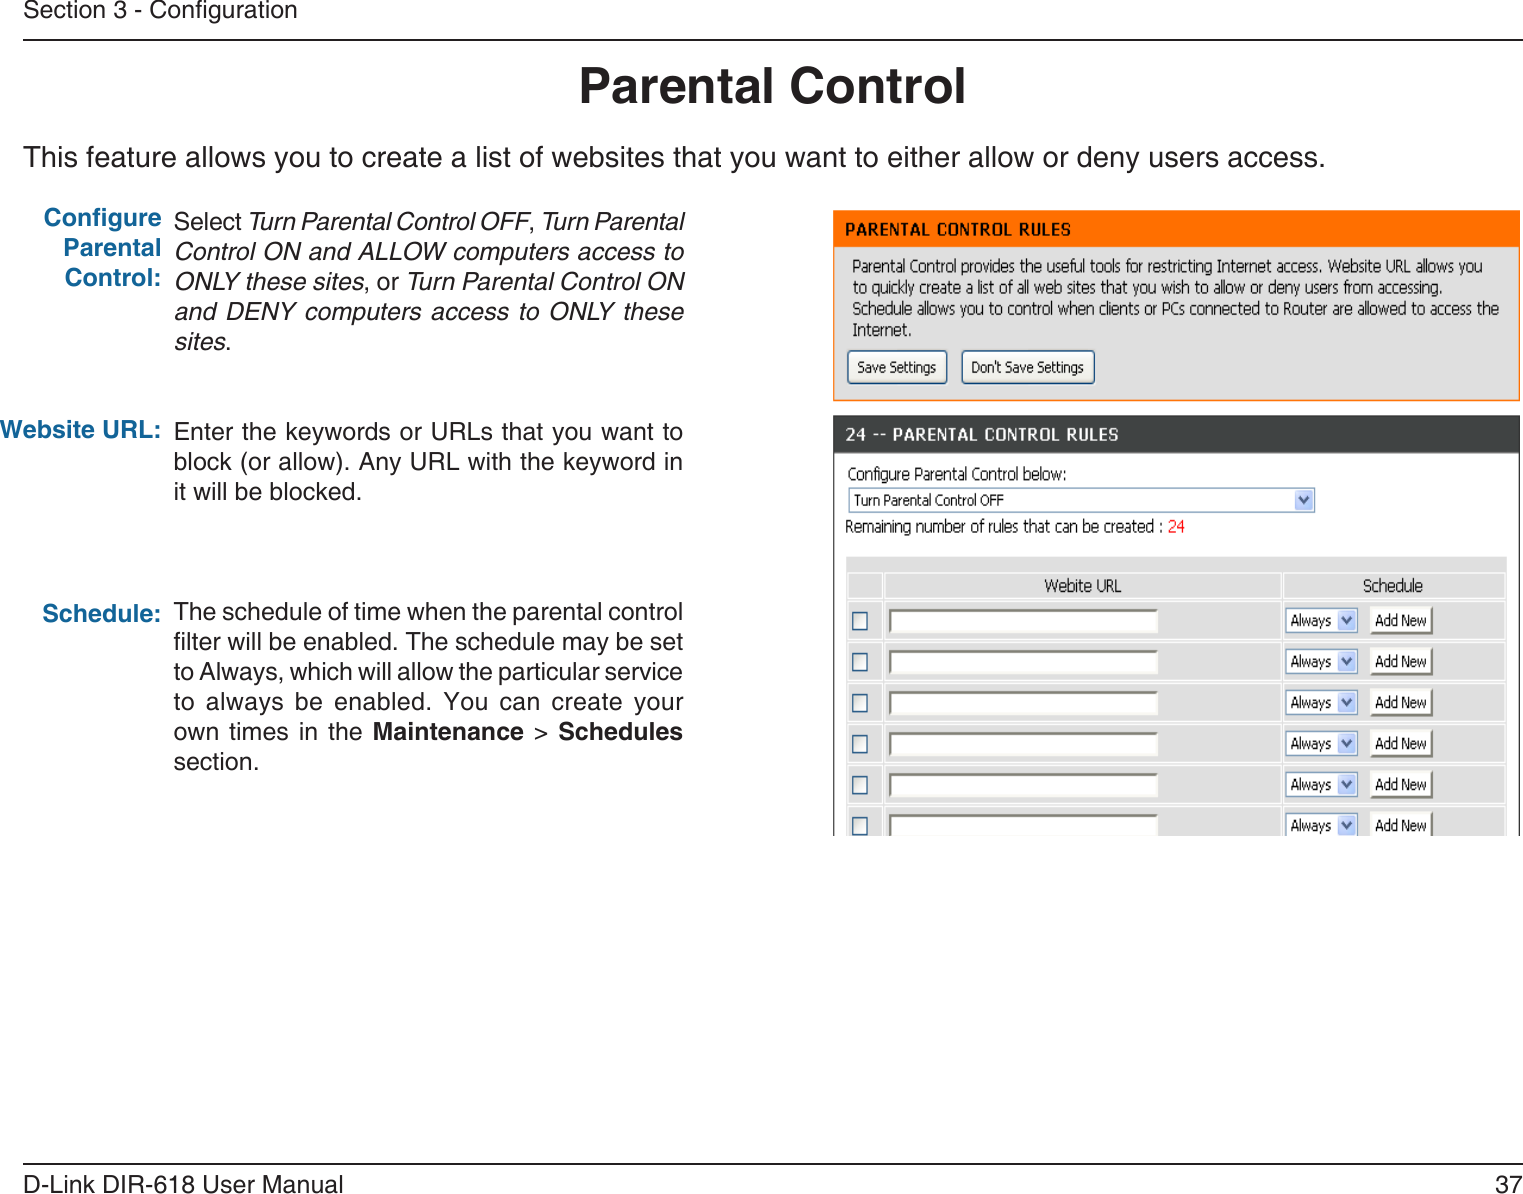 37D-Link DIR-618 User ManualSection 3 - CongurationThis feature allows you to create a list of websites that you want to either allow or deny users access.Parental ControlSelect Turn Parental Control OFF, Turn ParentalControl ON and ALLOW computers access toONLY these sites, or Turn Parental Control ONand DENY computers  access to  ONLY thesesites.Enter the keywords or URLs that you want toblock (or allow). Any URL with the keyword init will be blocked.The schedule of time when the parental controllter will be enabled. The schedule may be set to Always, which will allow the particular service to  always  be  enabled.  You  can  create  yourown times  in  the  Maintenance &gt; Schedules section.Congure Parental Control:Website URL:Schedule: